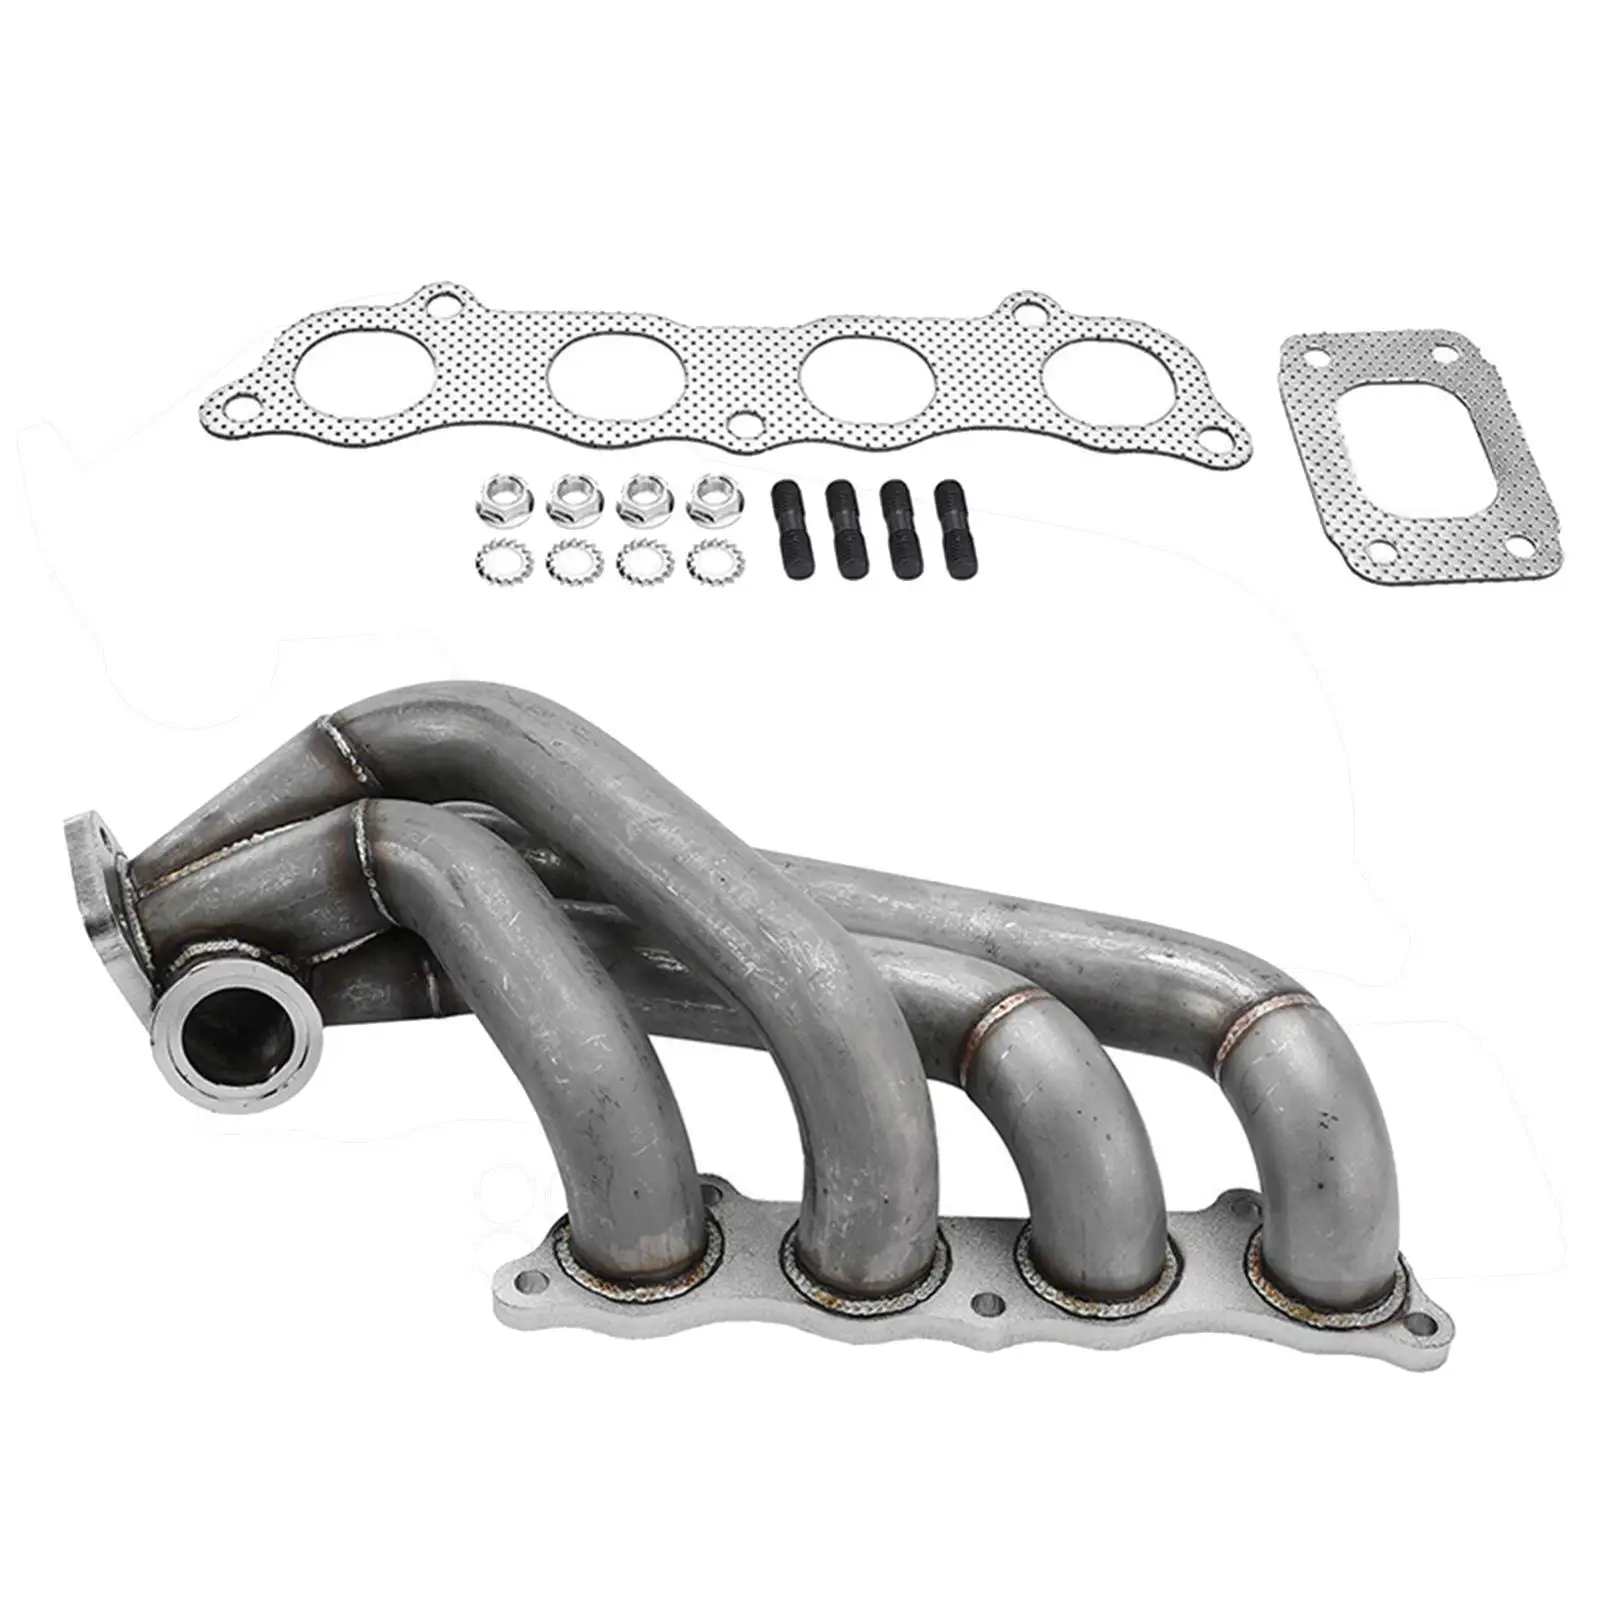 Turbo Manifold T3 with Gasket Kits Car Accessories for Honda Acura RSX Base Type S L4 2.0L Civic SI RSX K20 Easy to Install